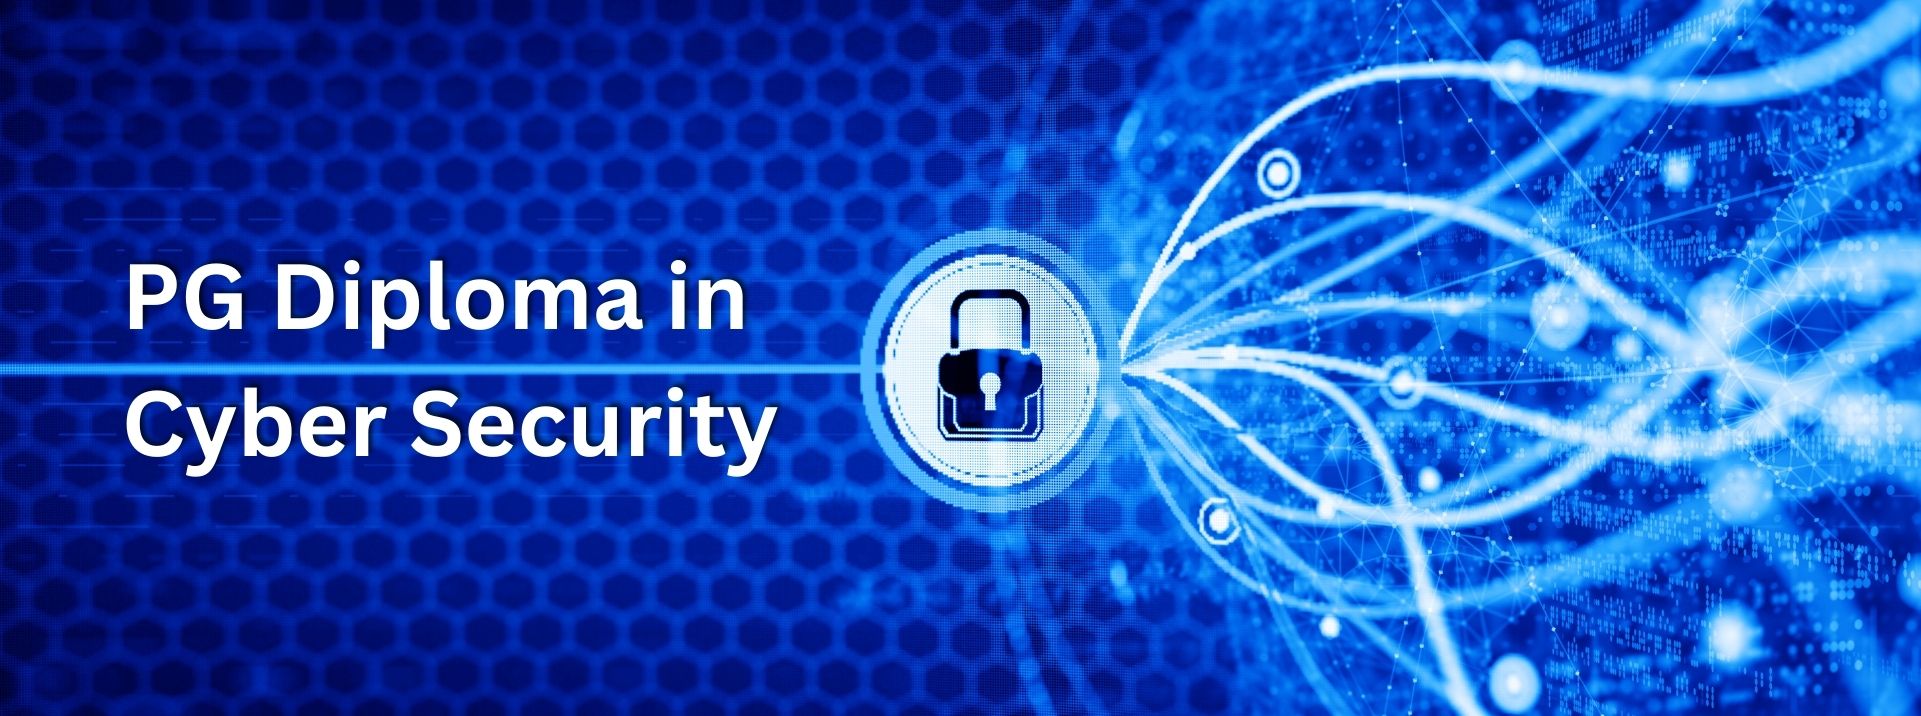 PG Diploma in Cyber Security